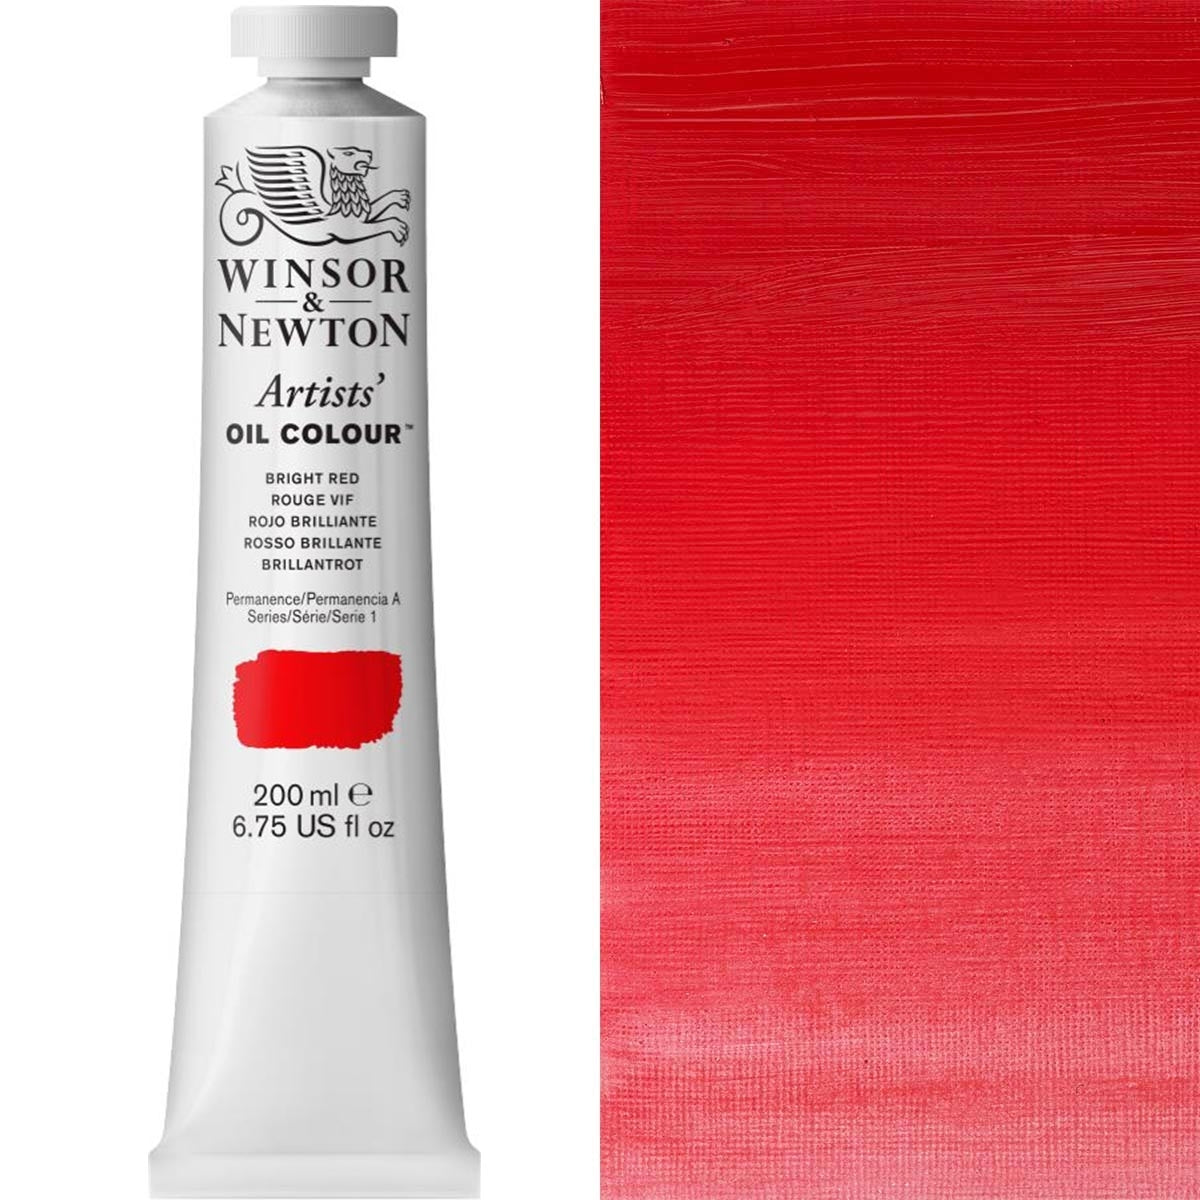 Winsor and Newton - Artists' Oil Colour - 200ml - Bright Red